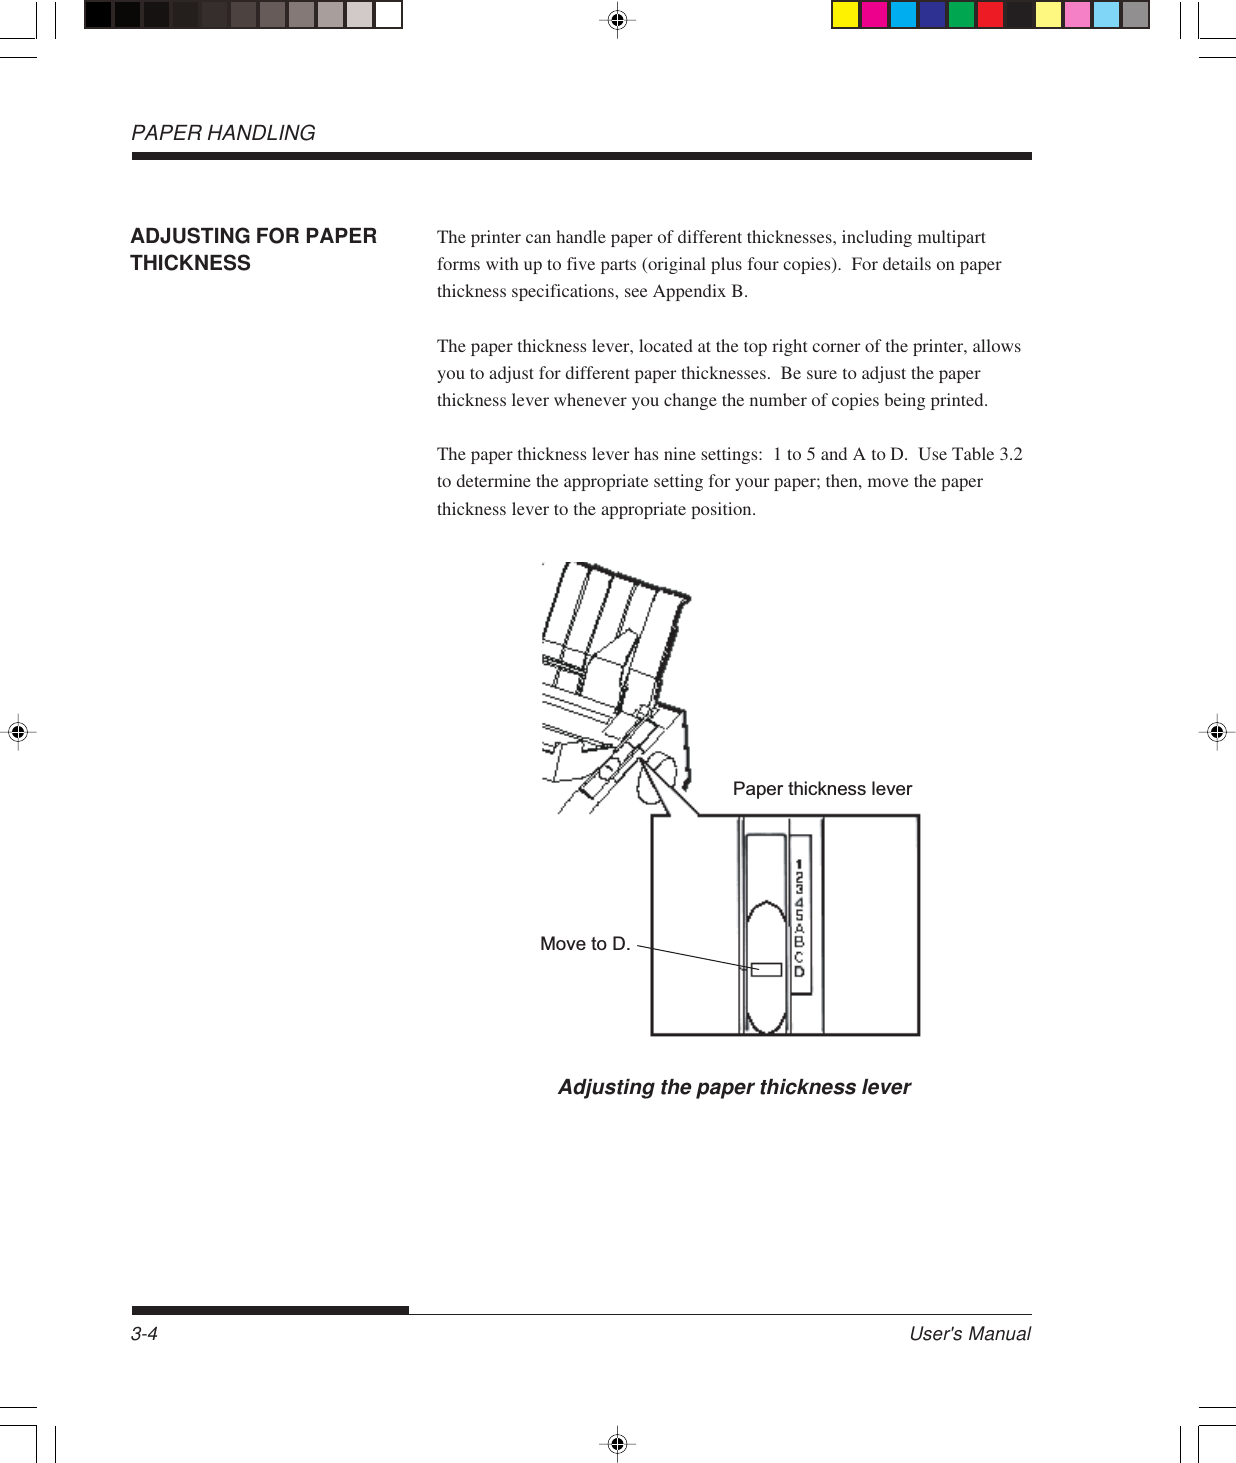 PAPER HANDLINGUser&apos;s Manual3-4ADJUSTING FOR PAPERTHICKNESSThe printer can handle paper of different thicknesses, including multipartforms with up to five parts (original plus four copies).  For details on paperthickness specifications, see Appendix B.The paper thickness lever, located at the top right corner of the printer, allowsyou to adjust for different paper thicknesses.  Be sure to adjust the paperthickness lever whenever you change the number of copies being printed.The paper thickness lever has nine settings:  1 to 5 and A to D.  Use Table 3.2to determine the appropriate setting for your paper; then, move the paperthickness lever to the appropriate position.Adjusting the paper thickness leverPaper thickness leverMove to D.